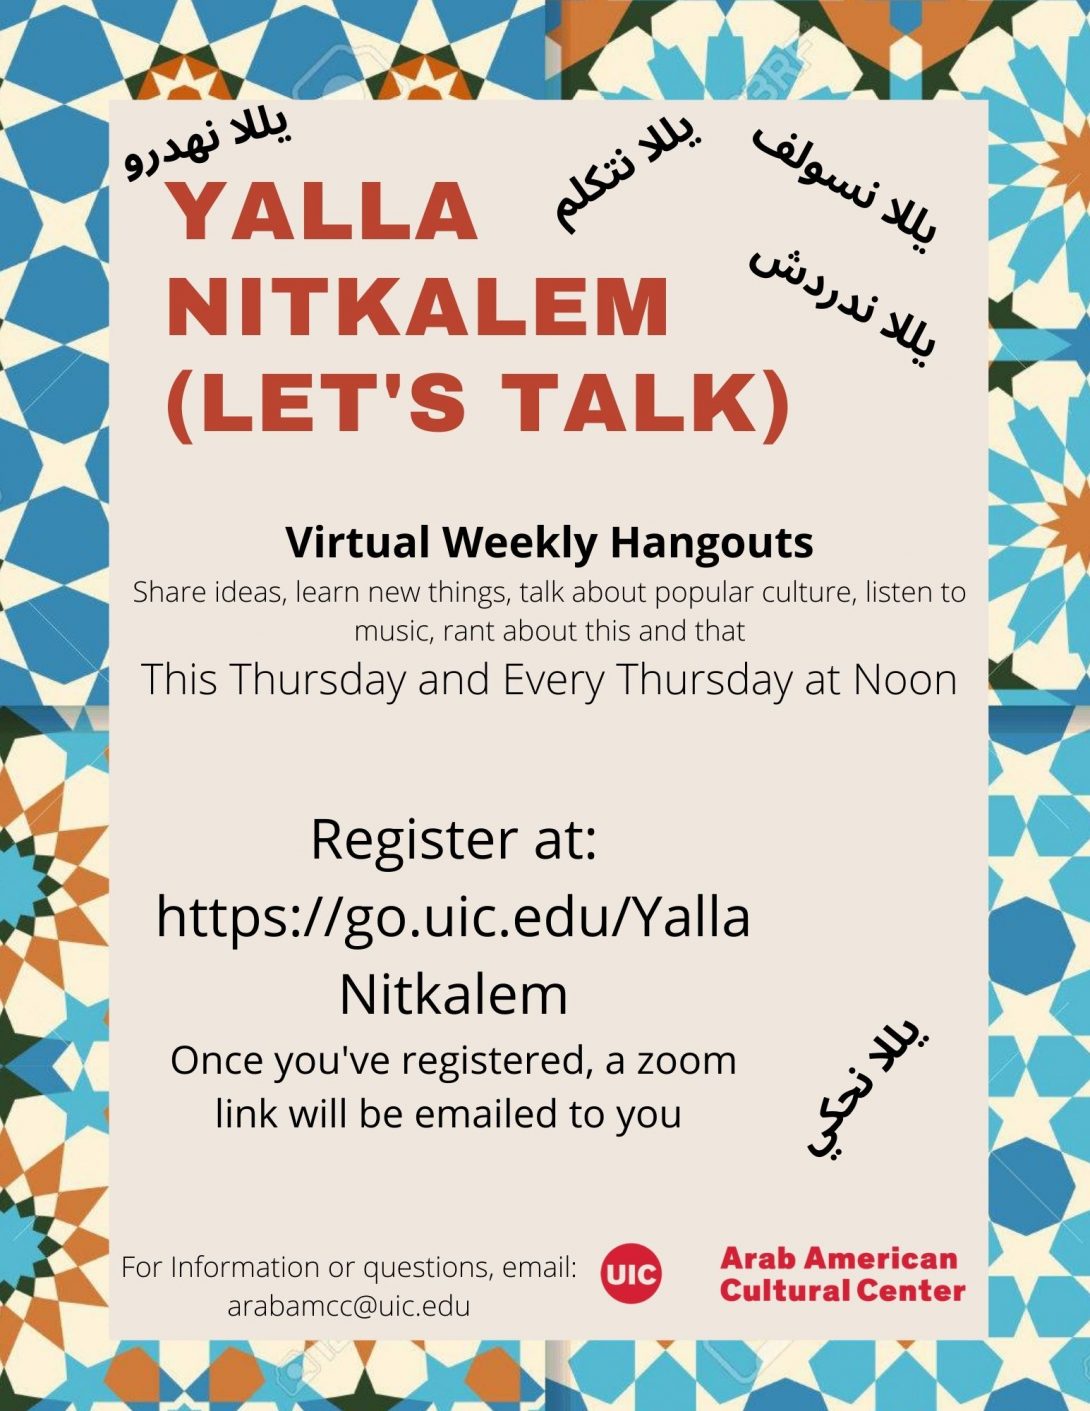 Colorful border around the image with blue, light orange and beige tiles. In the middle the flyer lists the name of the event Yalla NitKalem, information about when it is and the topics per day. Center logo is on the bottom right. Registeration information is on the close to bottom left followed by contact information. Different arabic dialect translations of the words Yalla Nitkalem (let's Talk) is sprinkled throughout in black lettering